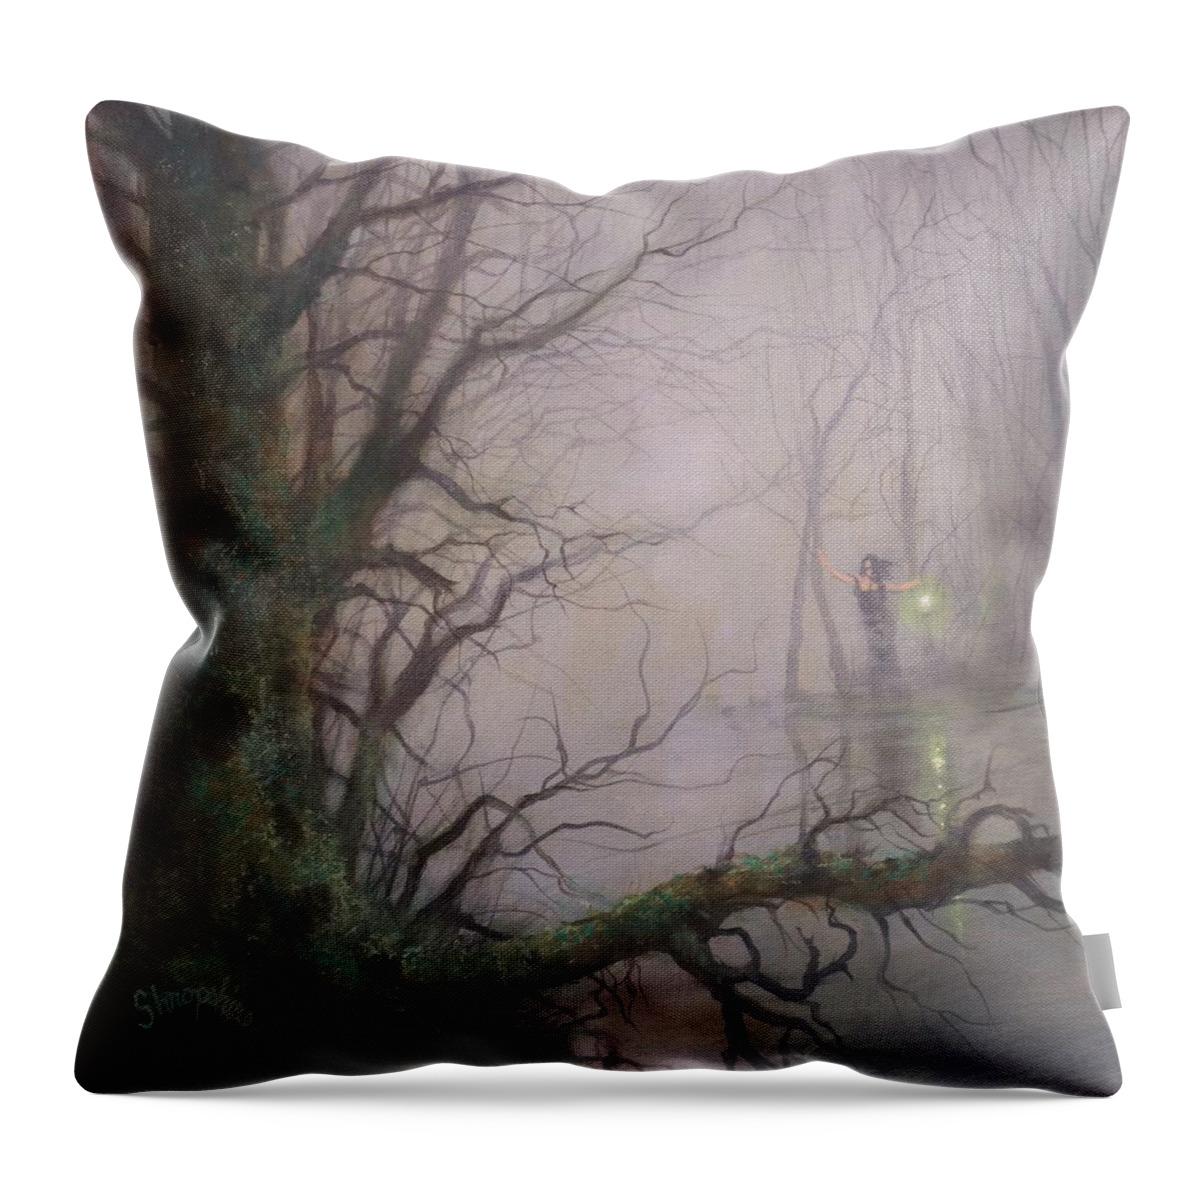 Halloween Throw Pillow featuring the painting Sorceress by Tom Shropshire